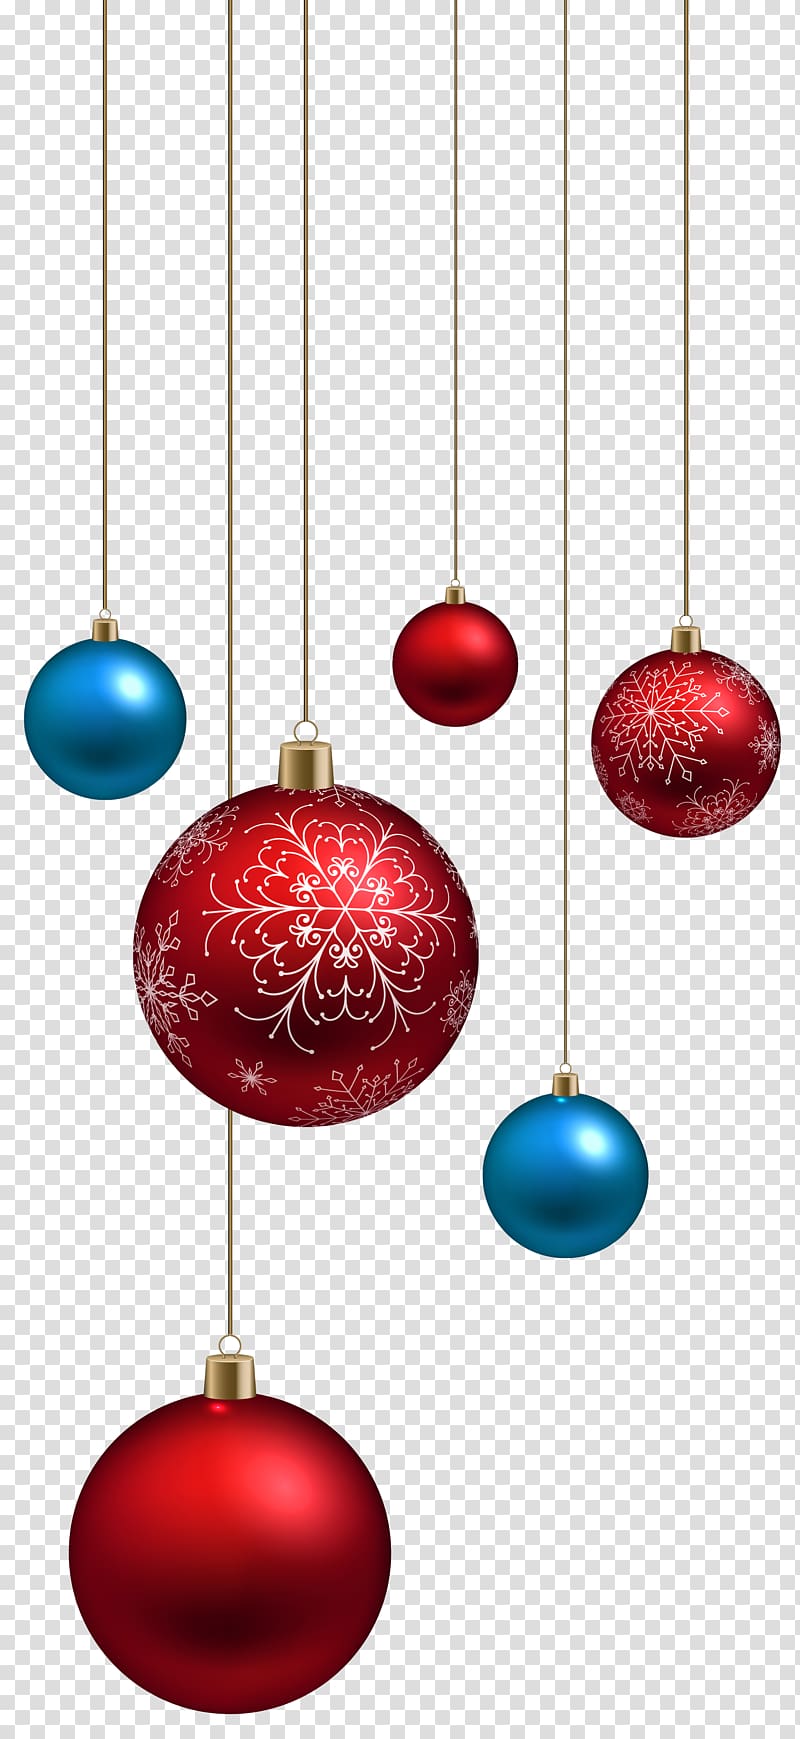 red and blue baubles, Santa Claus Christmas ornament , Red and Blue Christmas Balls transparent background PNG clipart